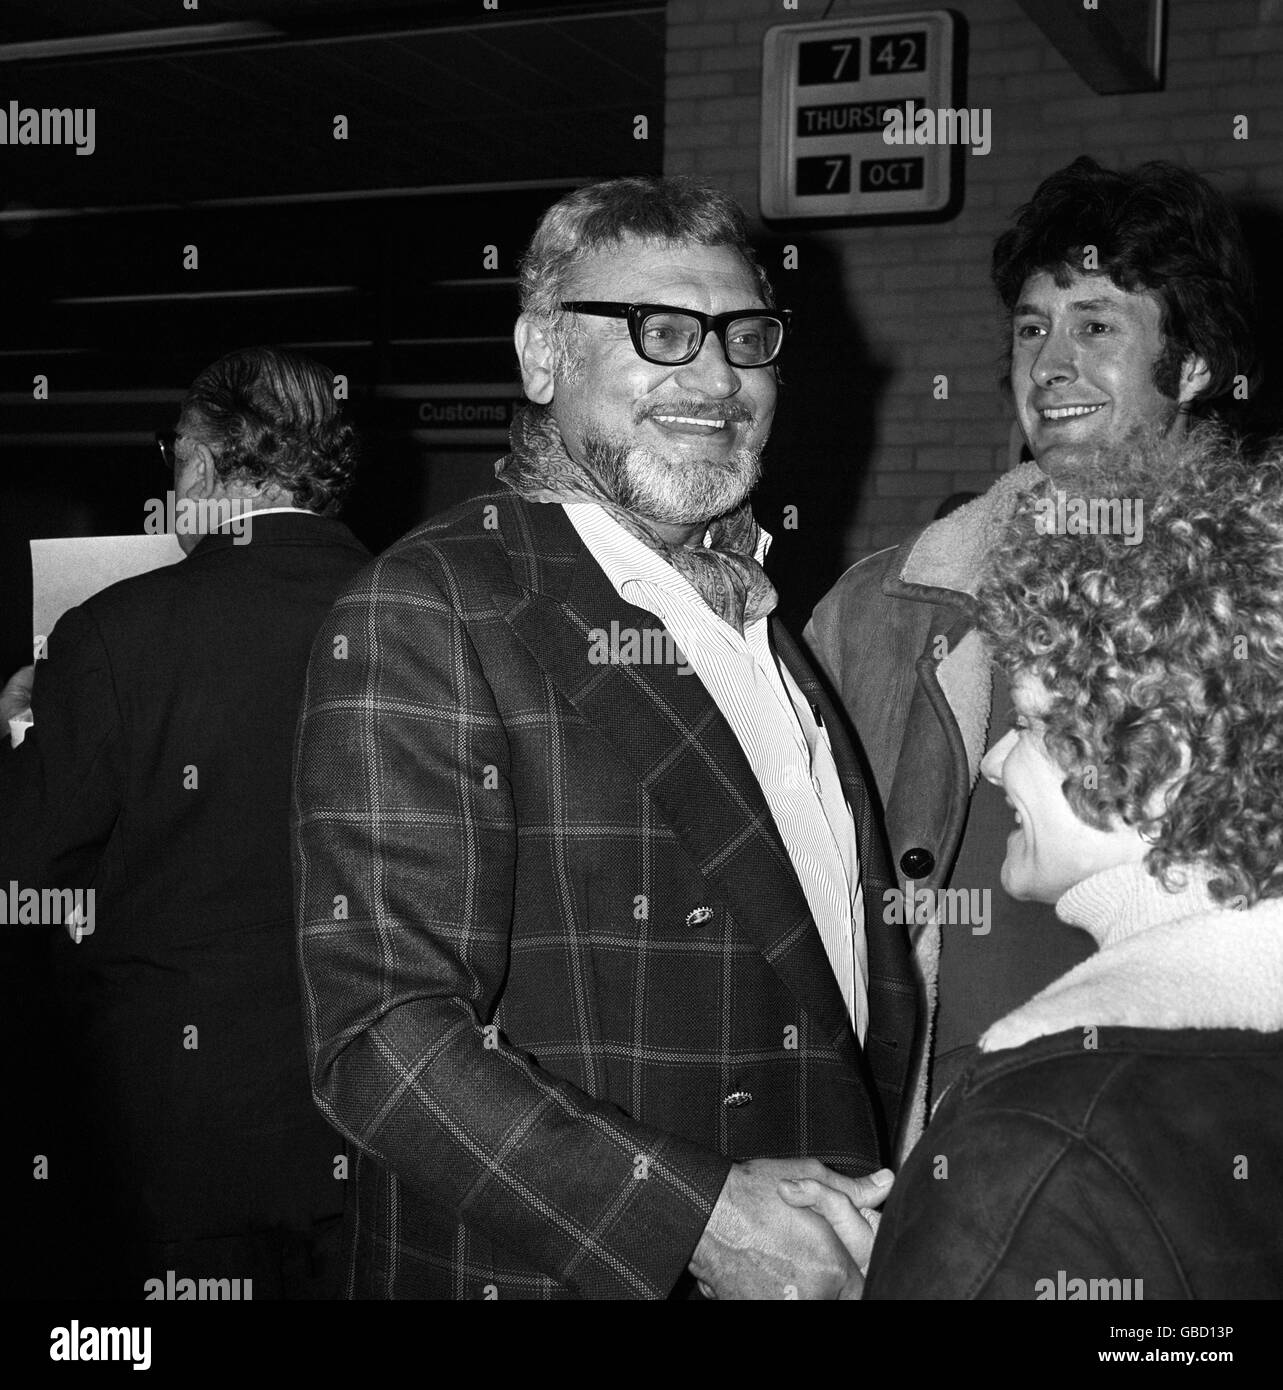 Music - Frankie Laine - 1974 - Heathrow Airport - London. American singer Frankie Laine arriving at Heathrow Airport for his concert tour of Britain. Stock Photo